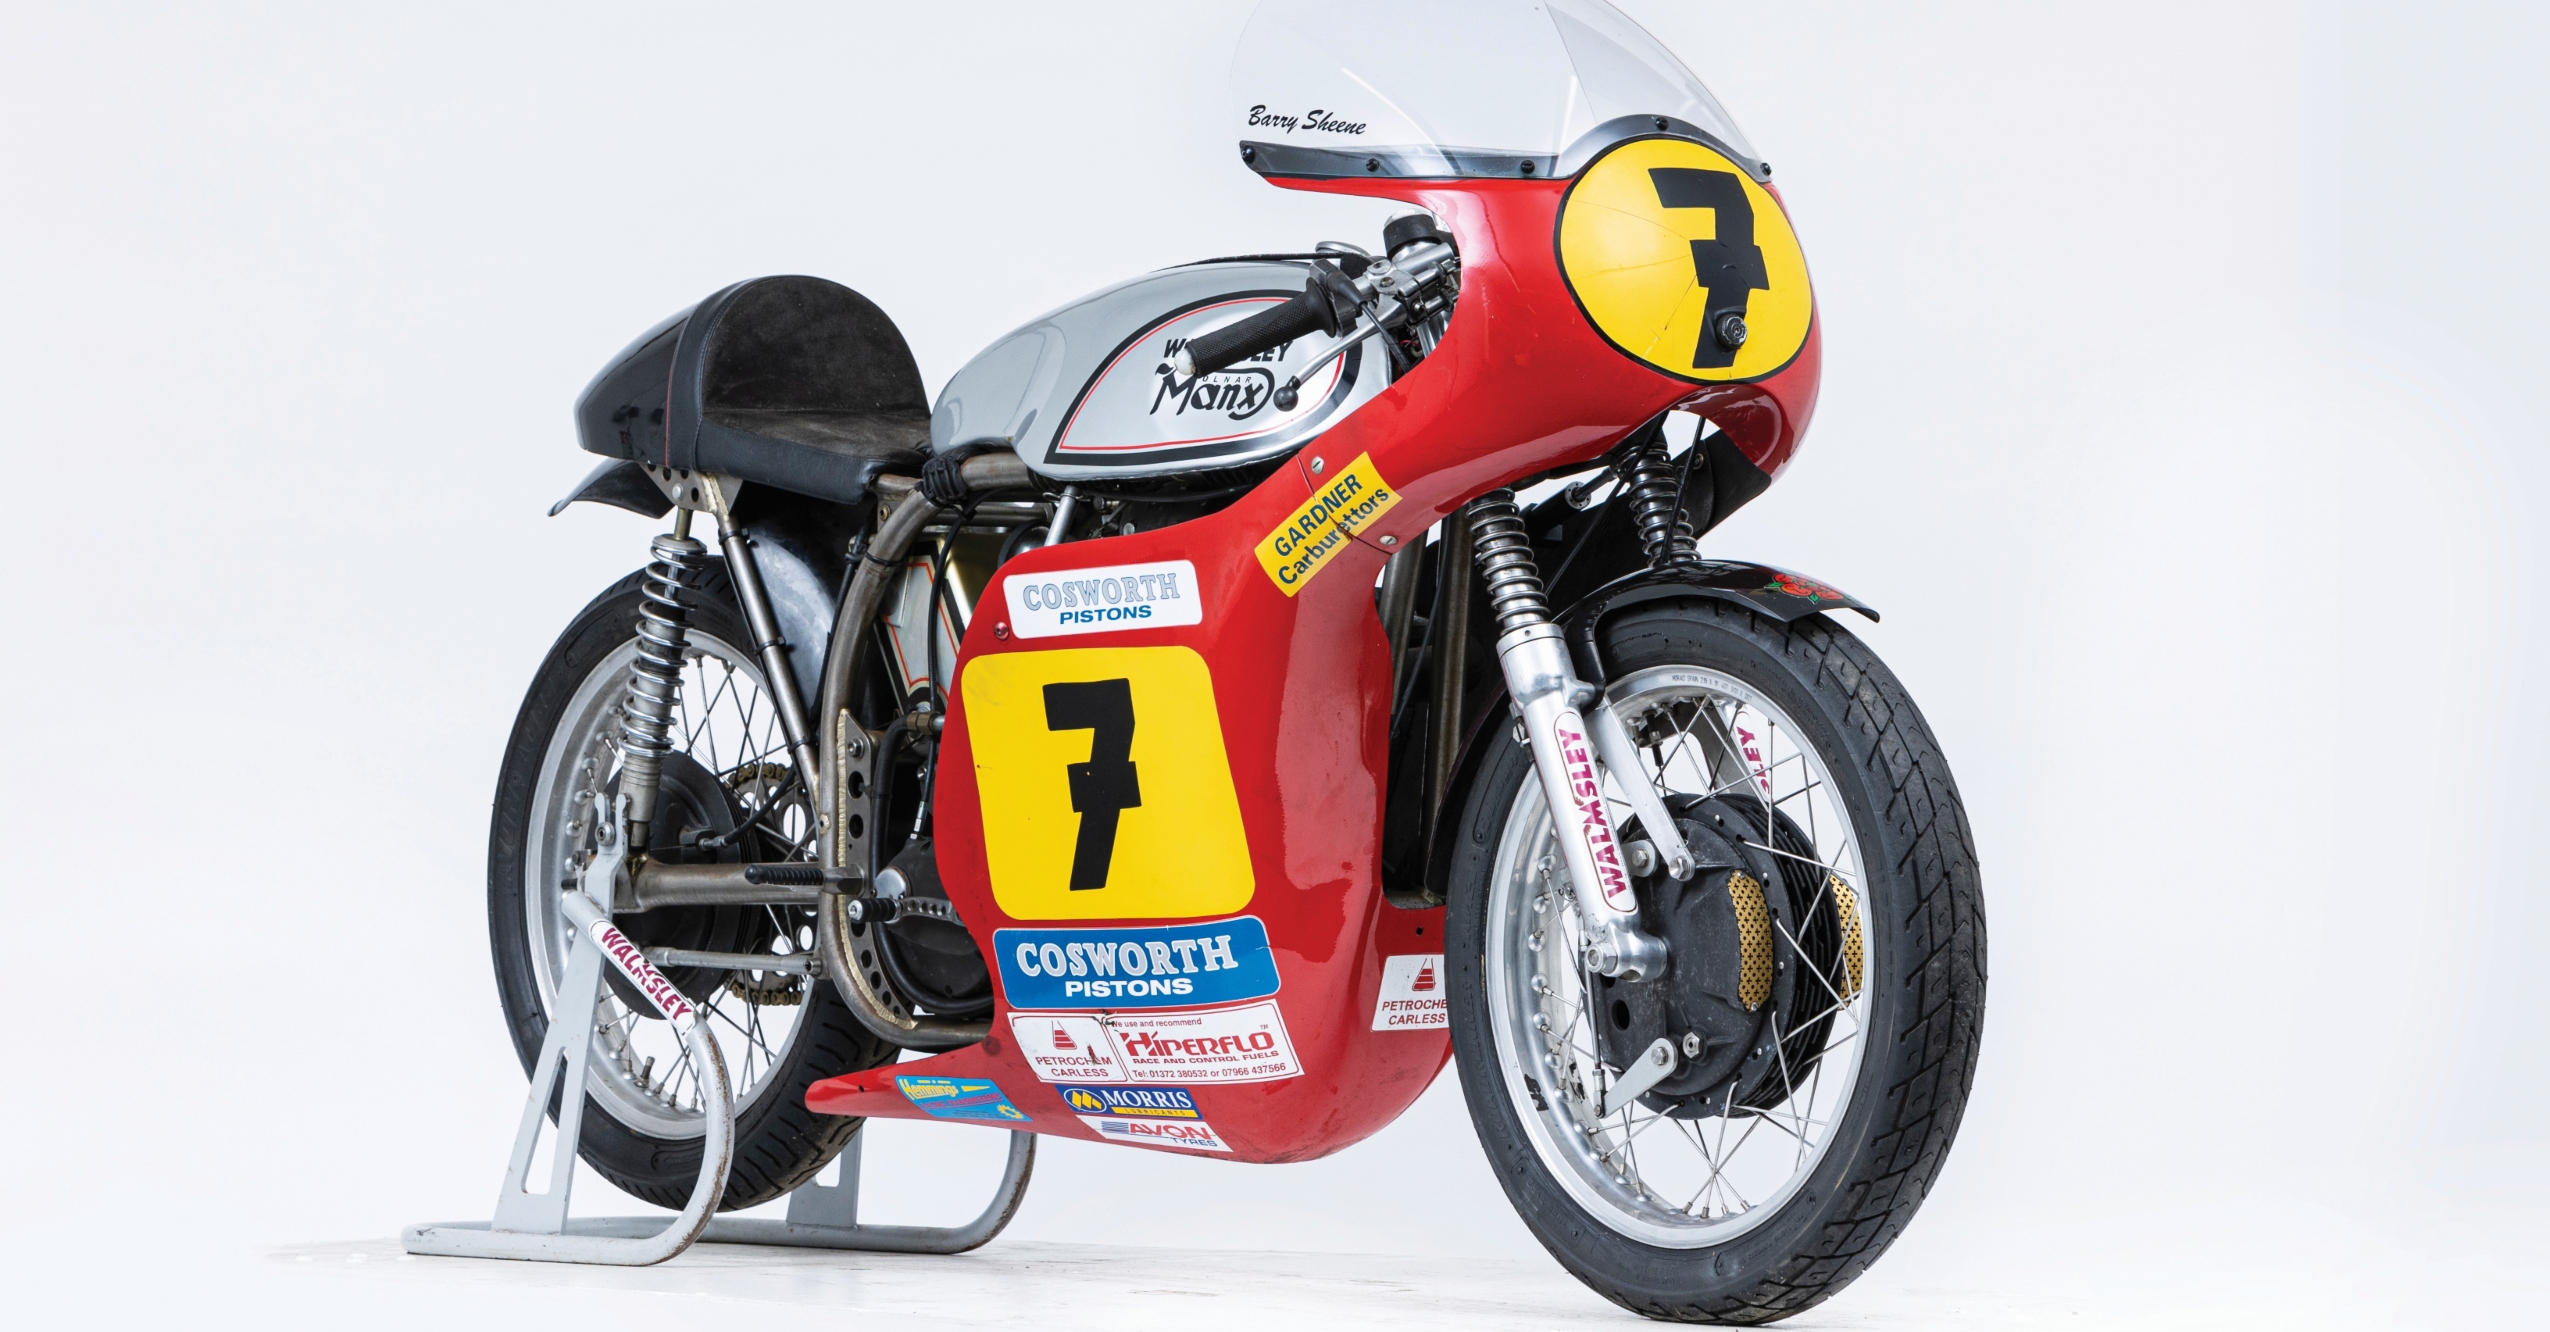 How This Classic Norton Motorcycle Made Racing History Maxim